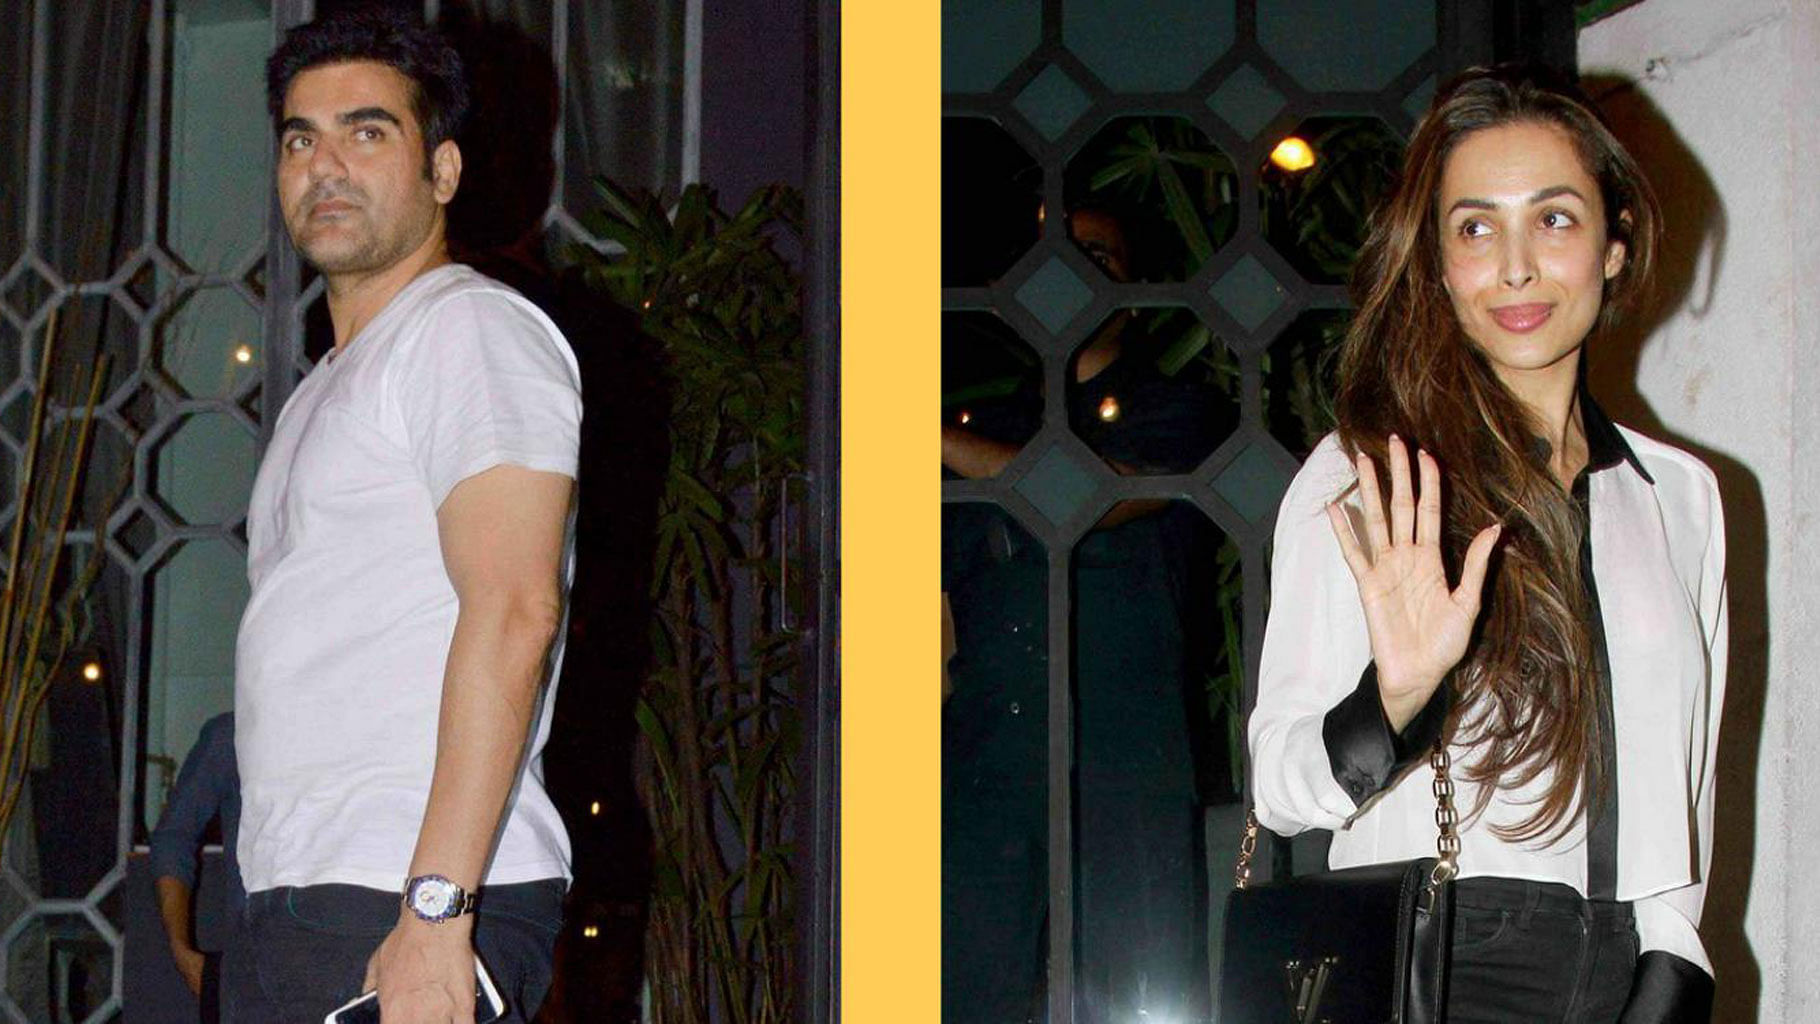 Arbaaz Khan and Malaika Arora at their last public appearance together for a family dinner on March 2 (Photos: Yogen Shah)